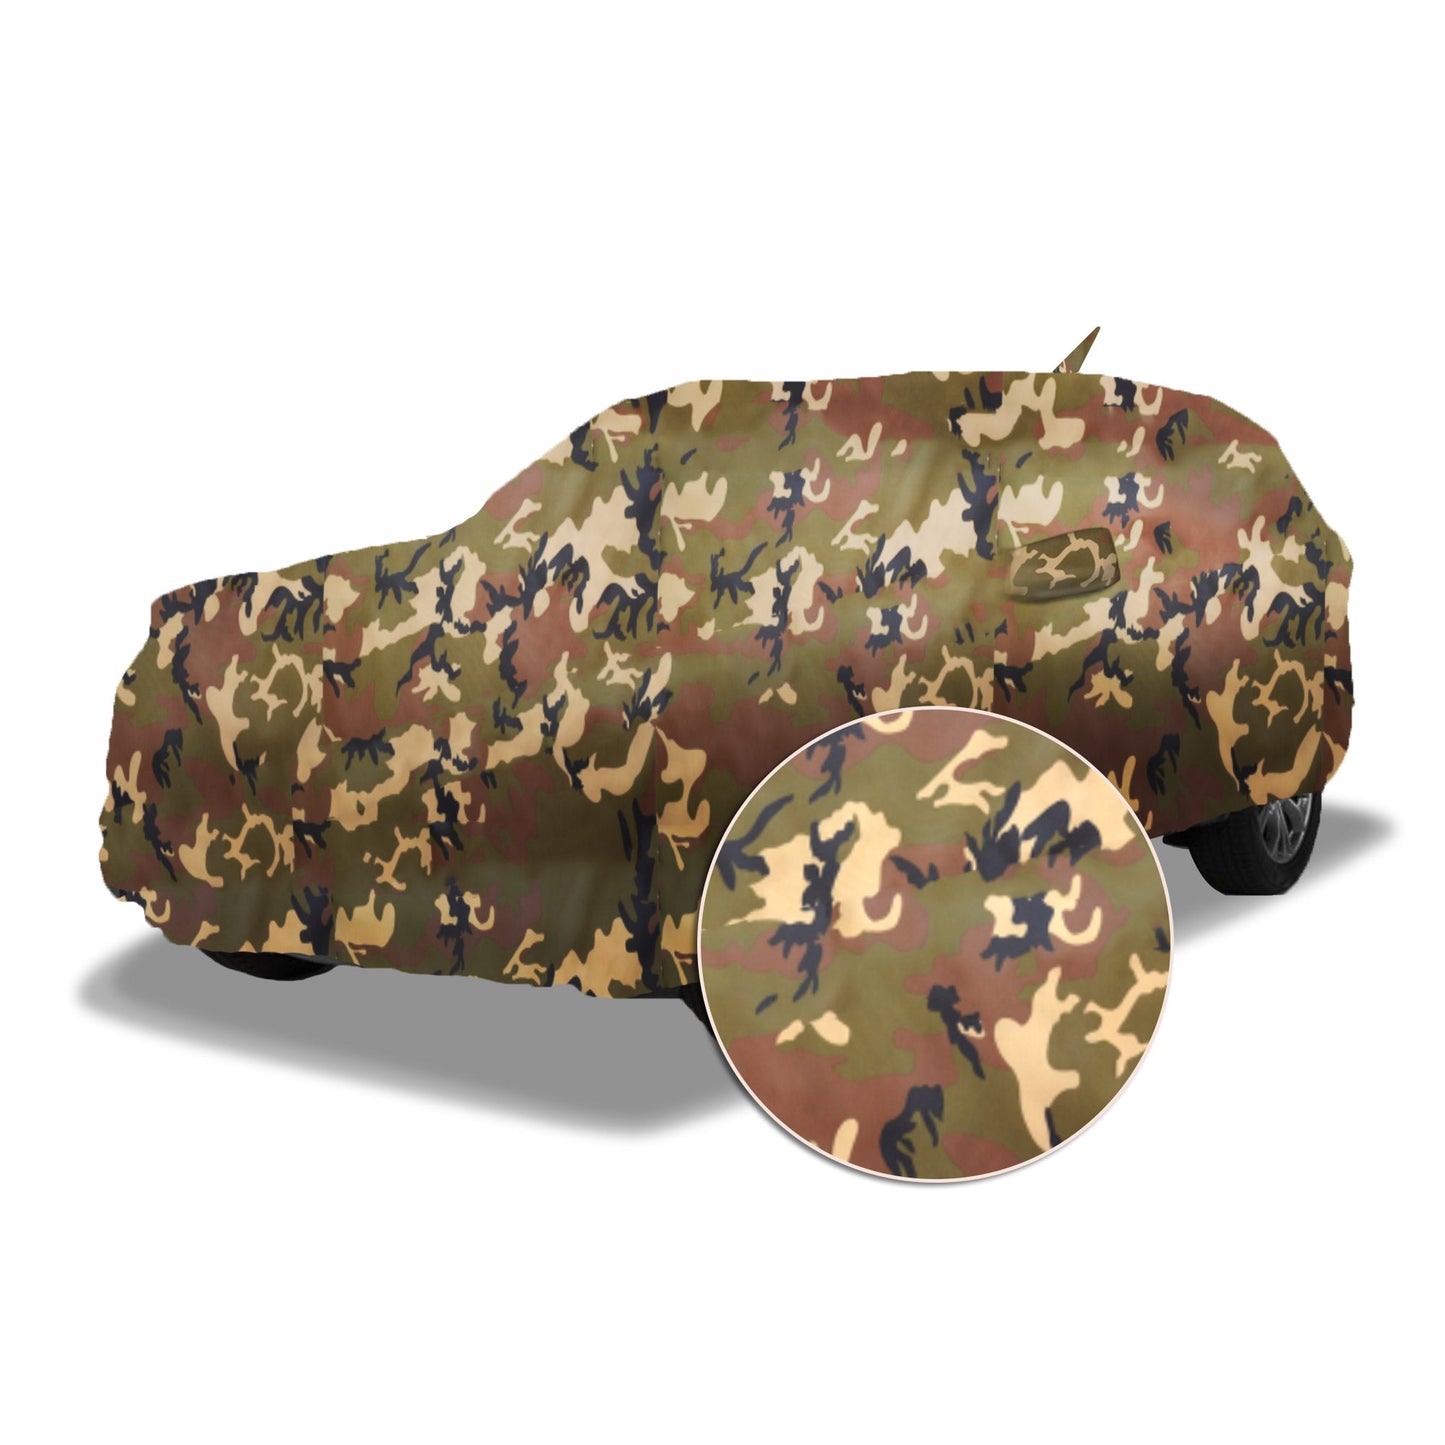 Ascot Honda Brio Car Body Cover Extra Strong & Dust Proof Jungle Military Car Cover with UV Proof & Water-Resistant Coating